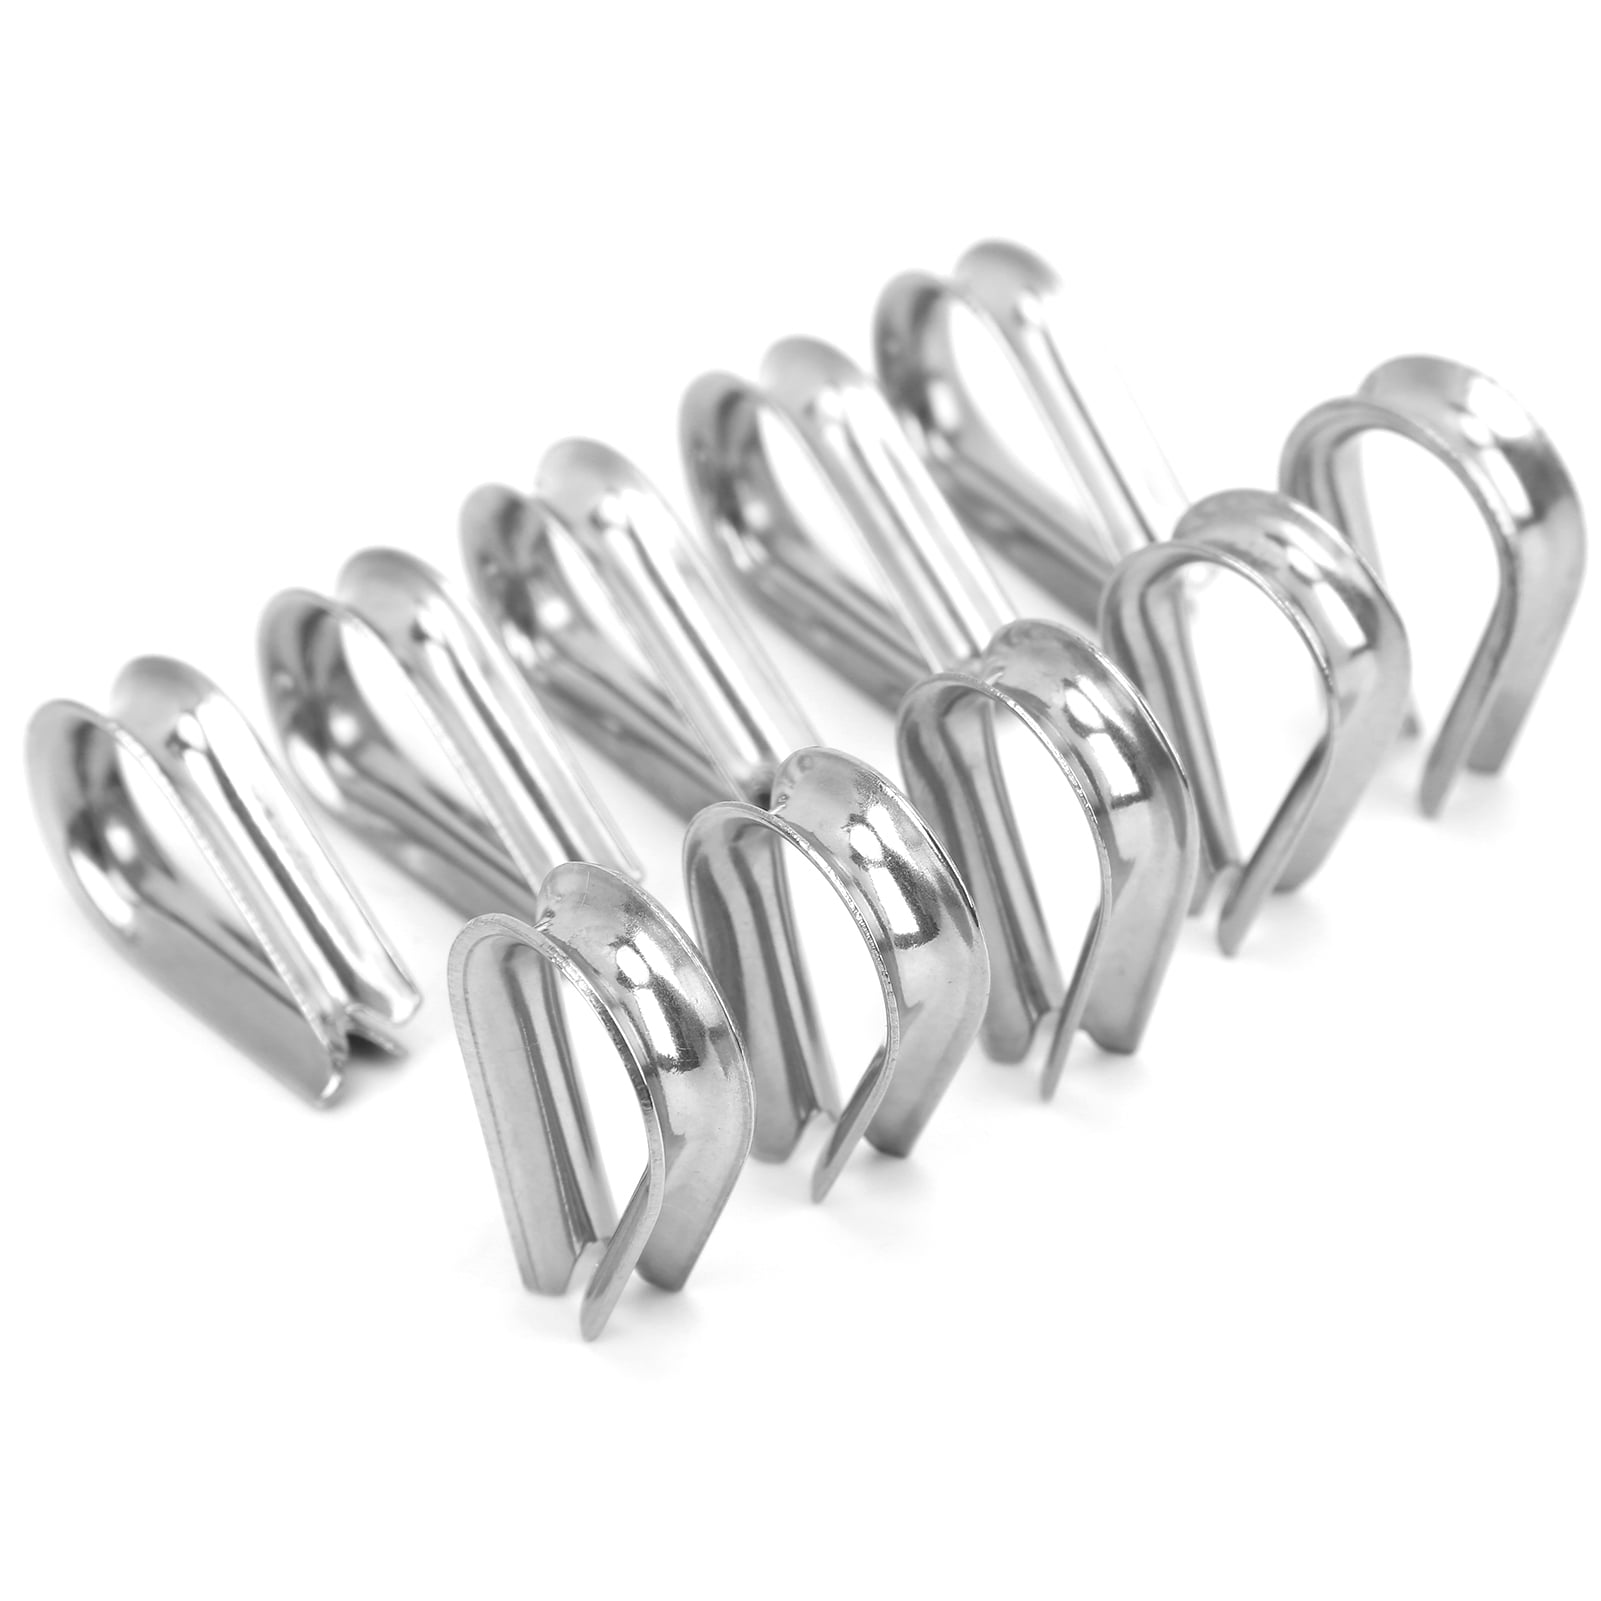 Thimble Wire Rope Grip & wire rope clamp Clamp Eyes Stainless Steel 4mm set of 2 